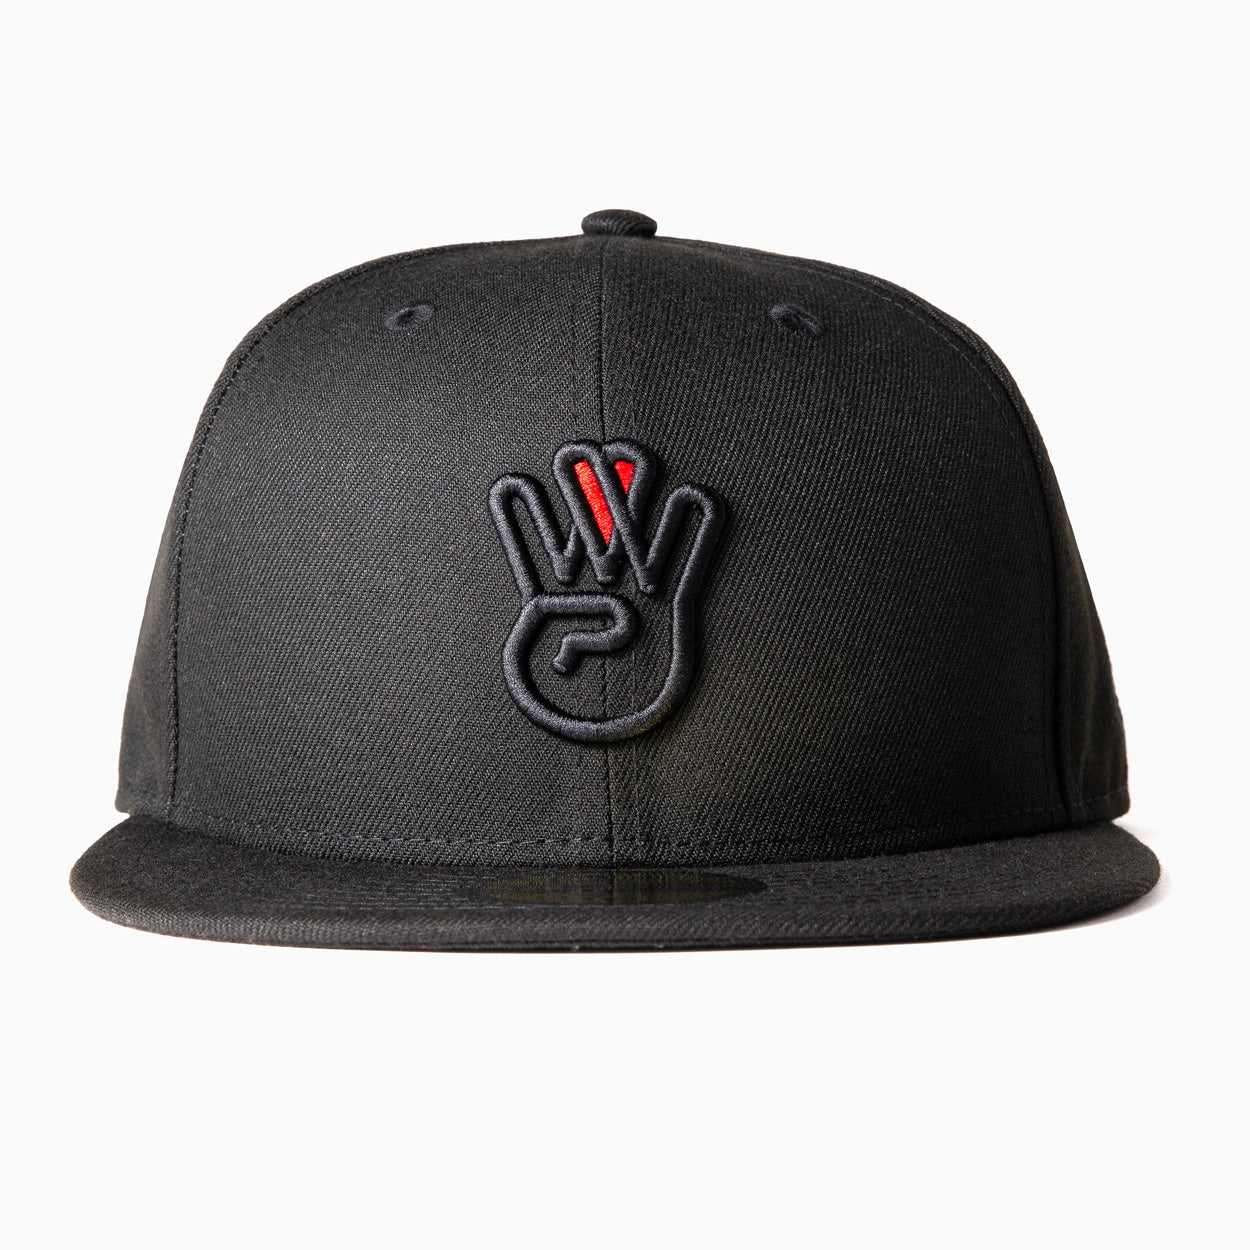 All Black New Era Fitted